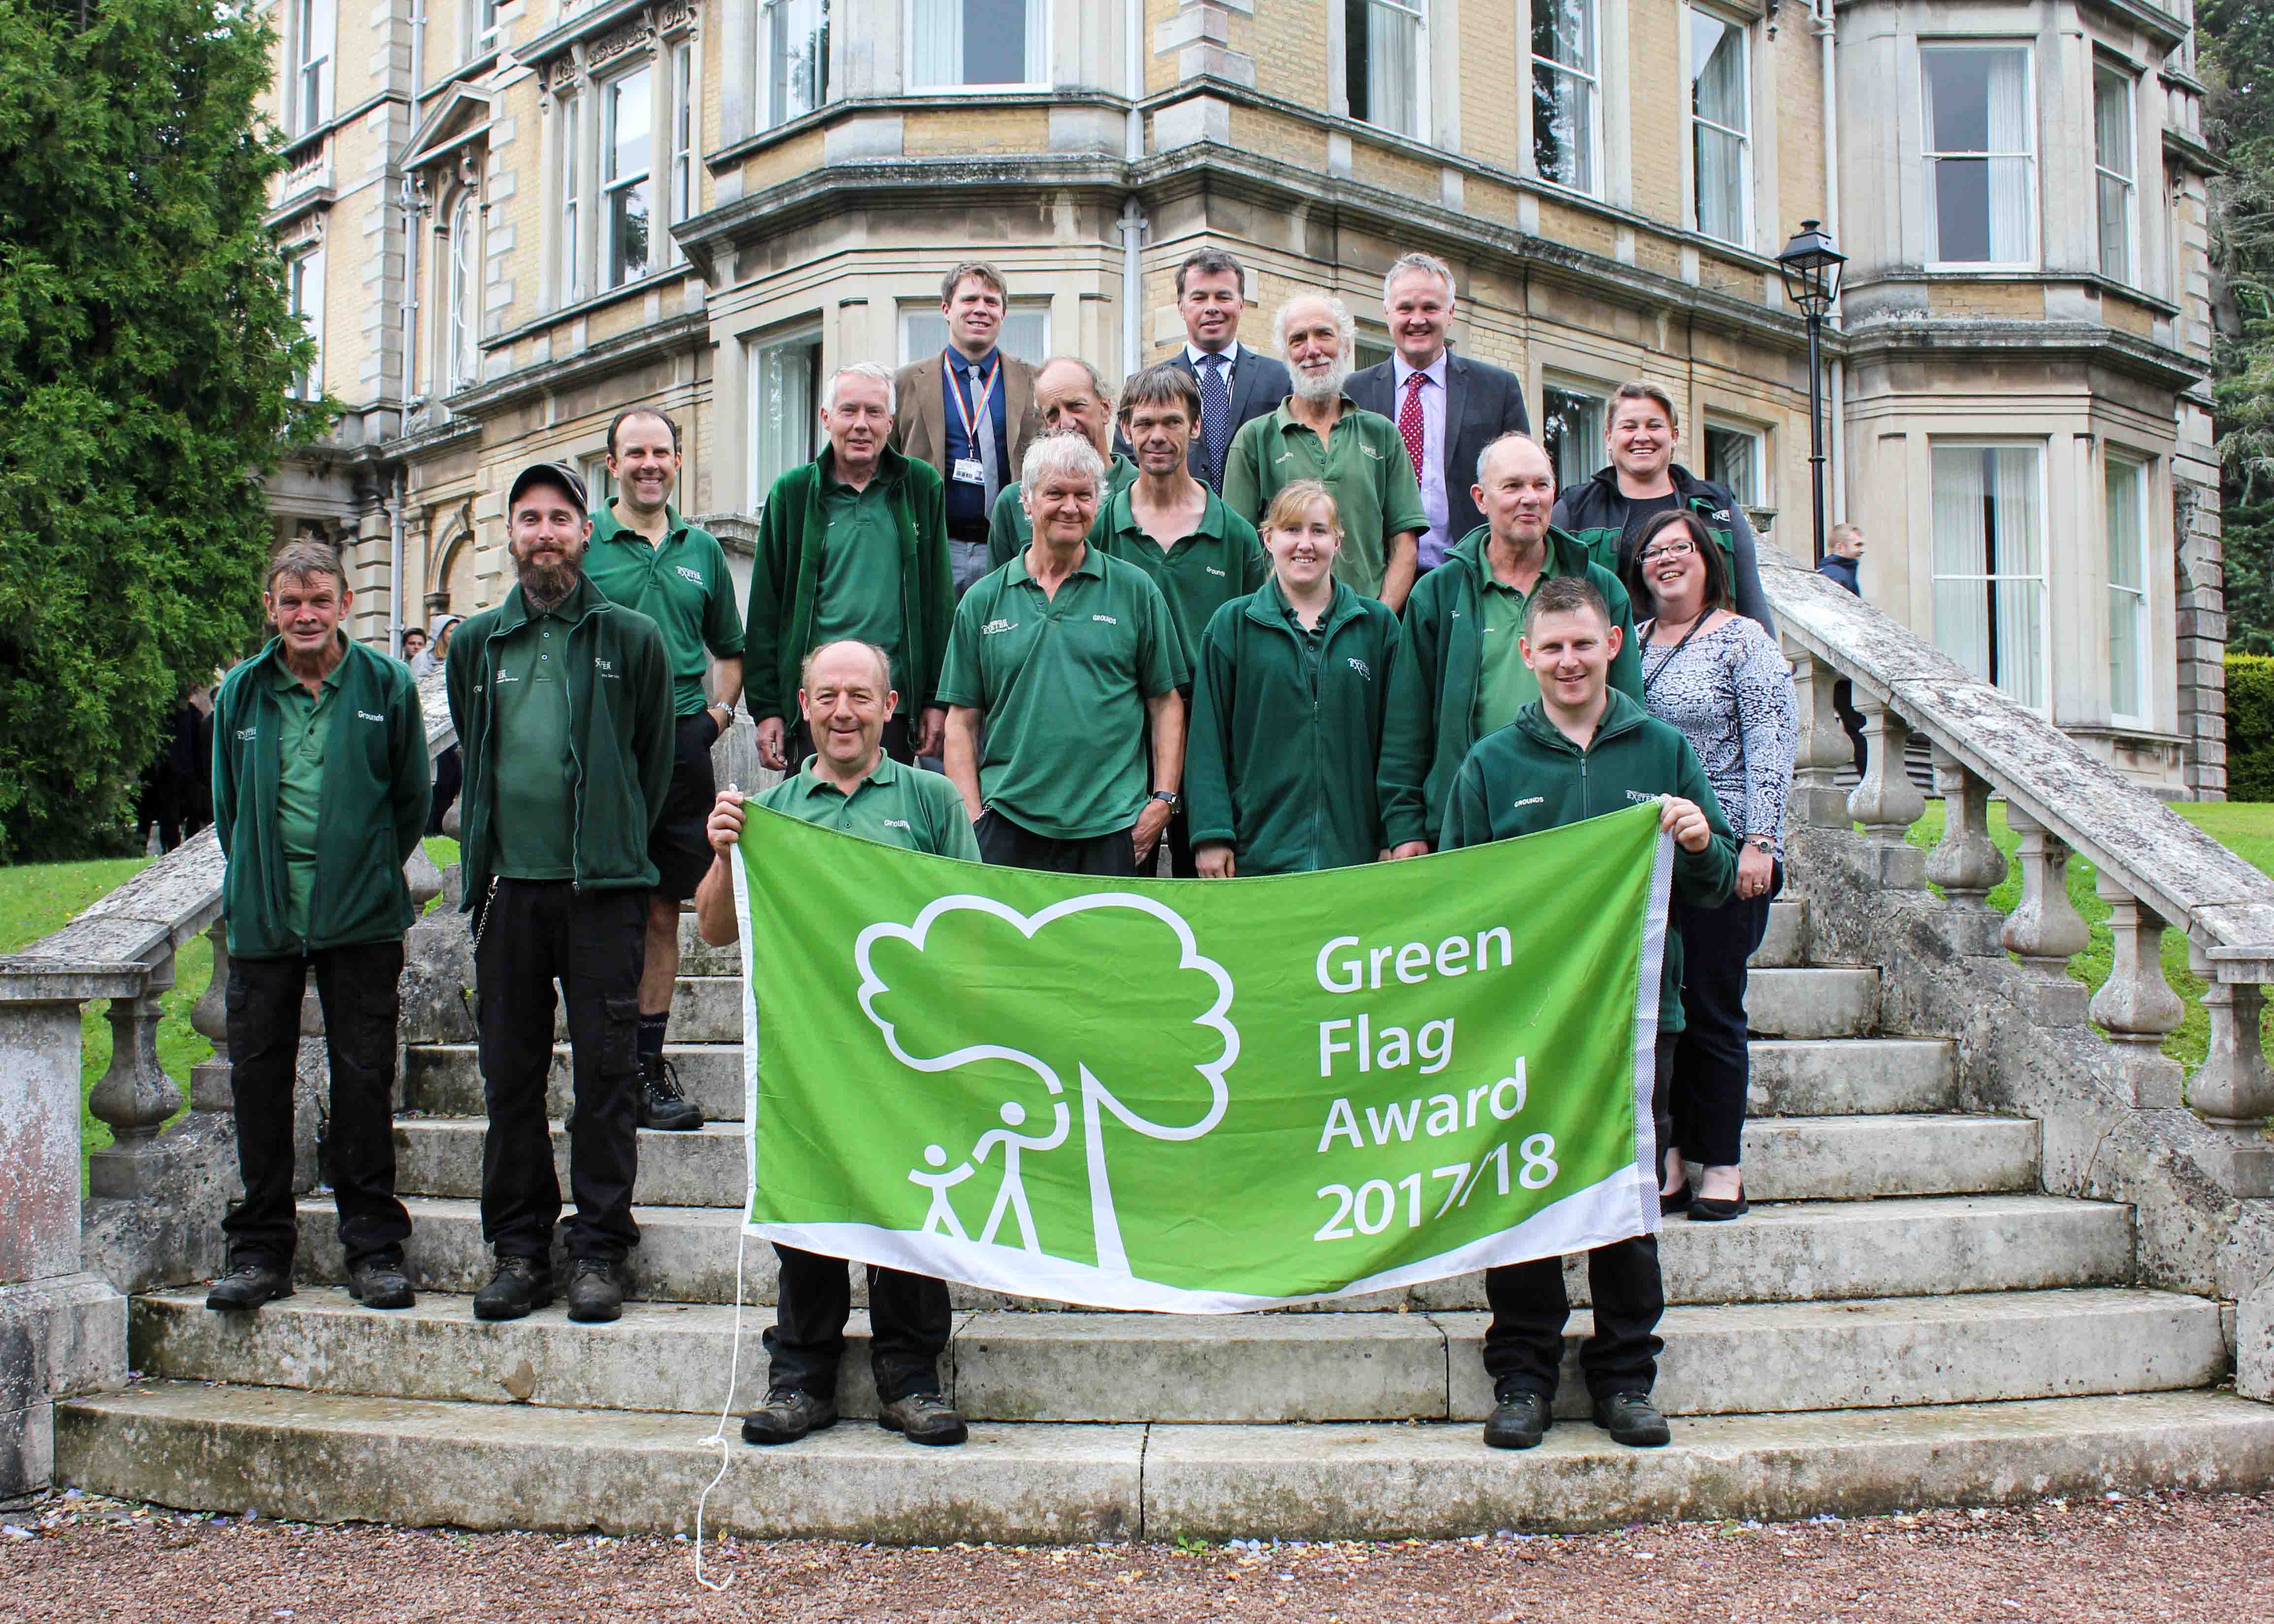 Grounds Team celebrating re-achieving the Green Flag Award 2017/18 